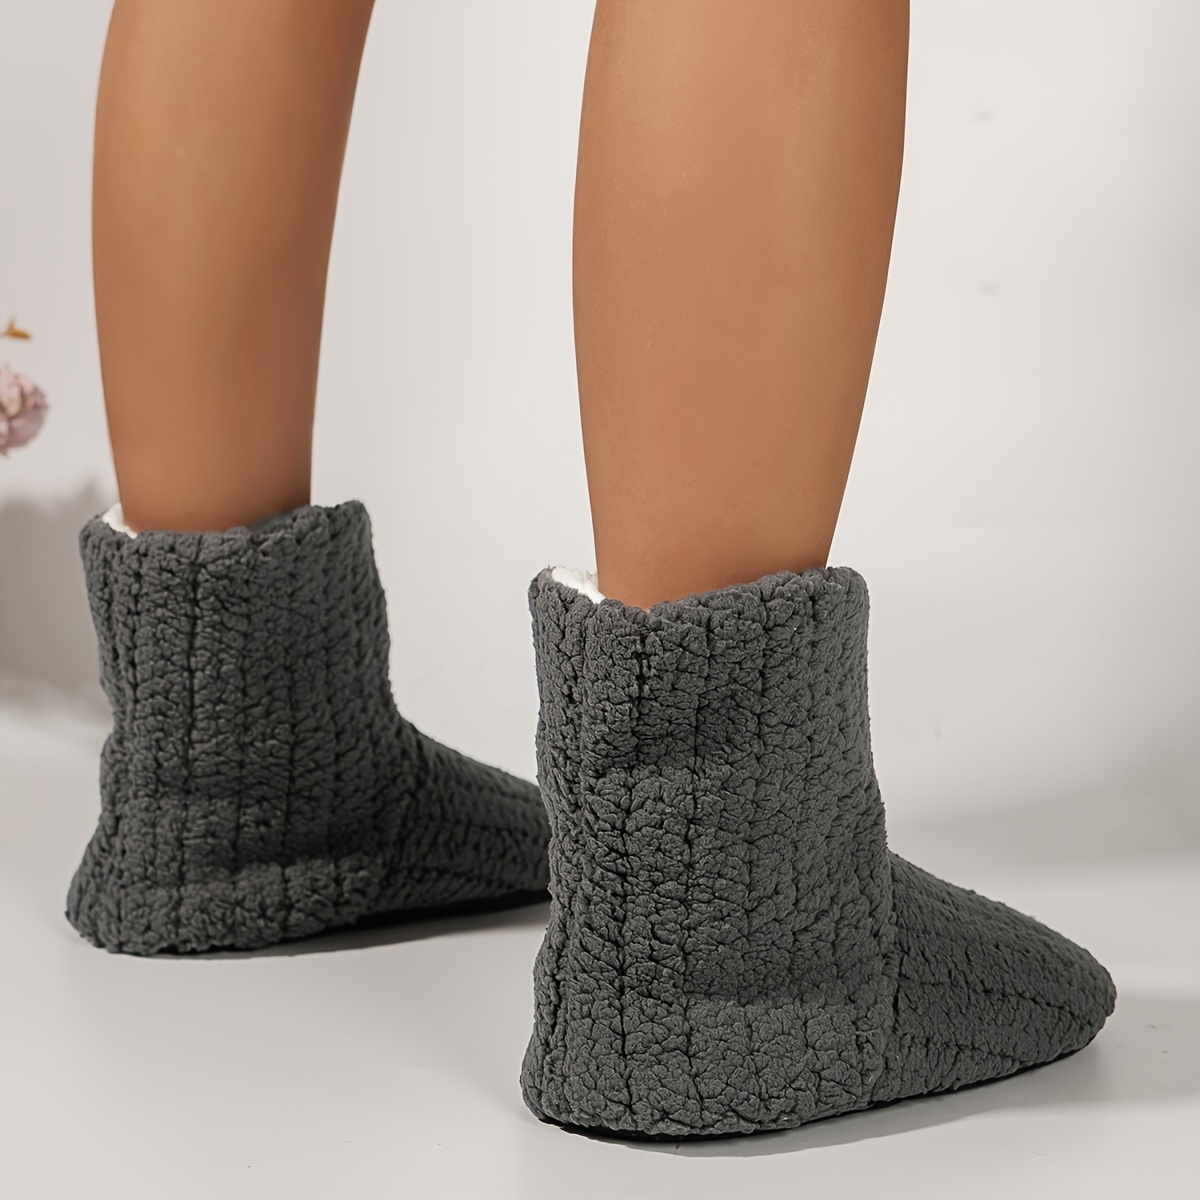 Women's Soft Sole Bootee Slippers